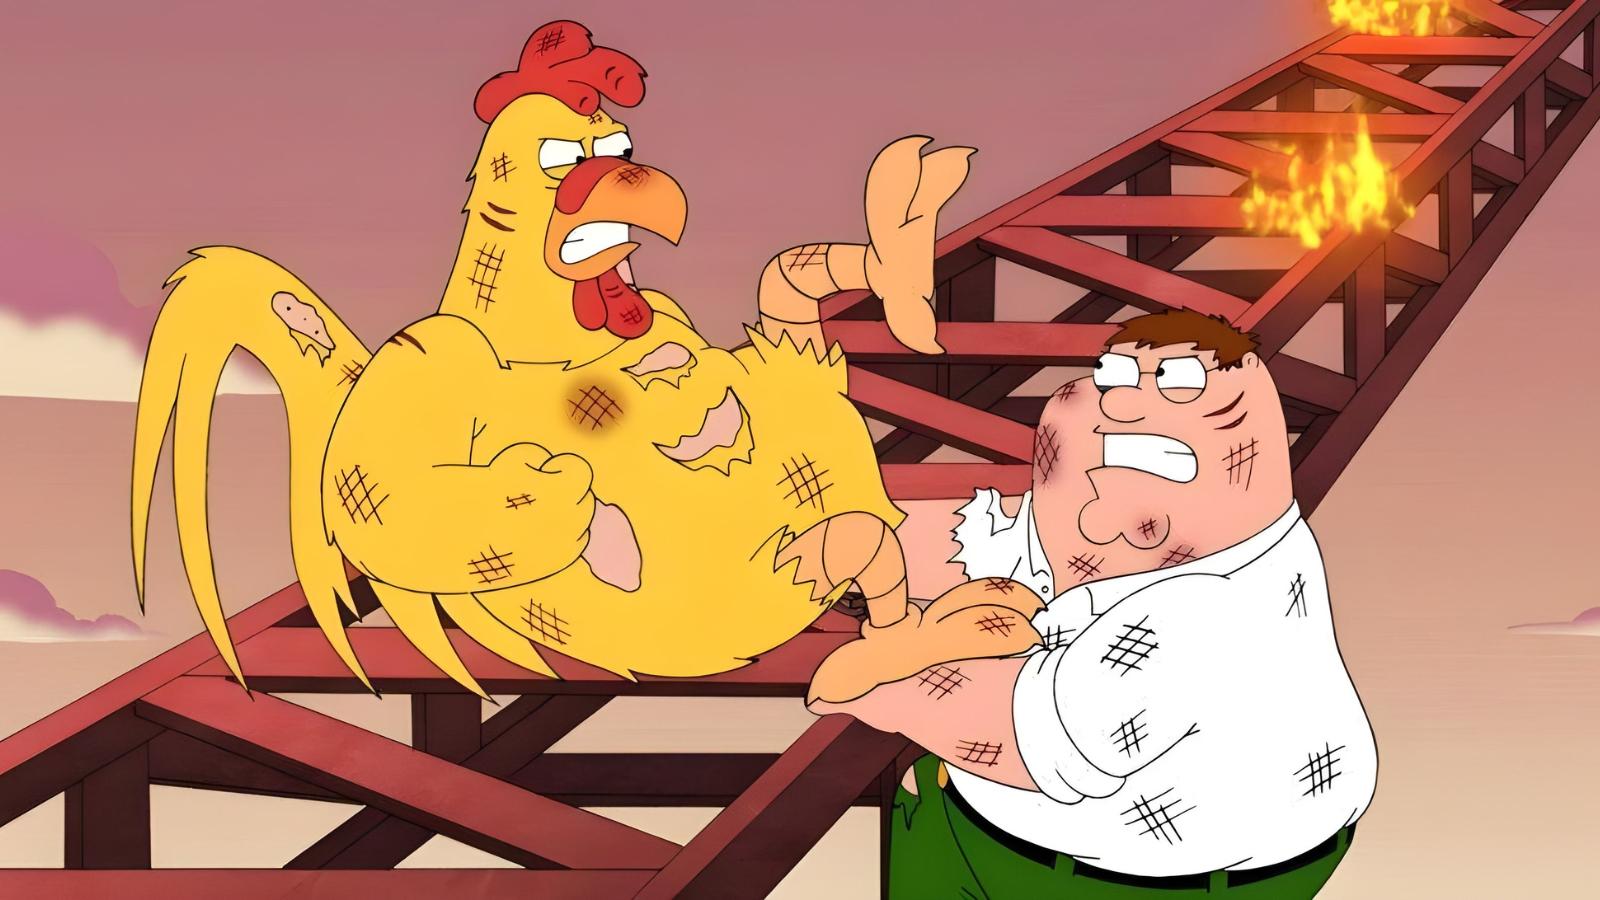 Giant Chicken vs Peter Griffin in Family Guy